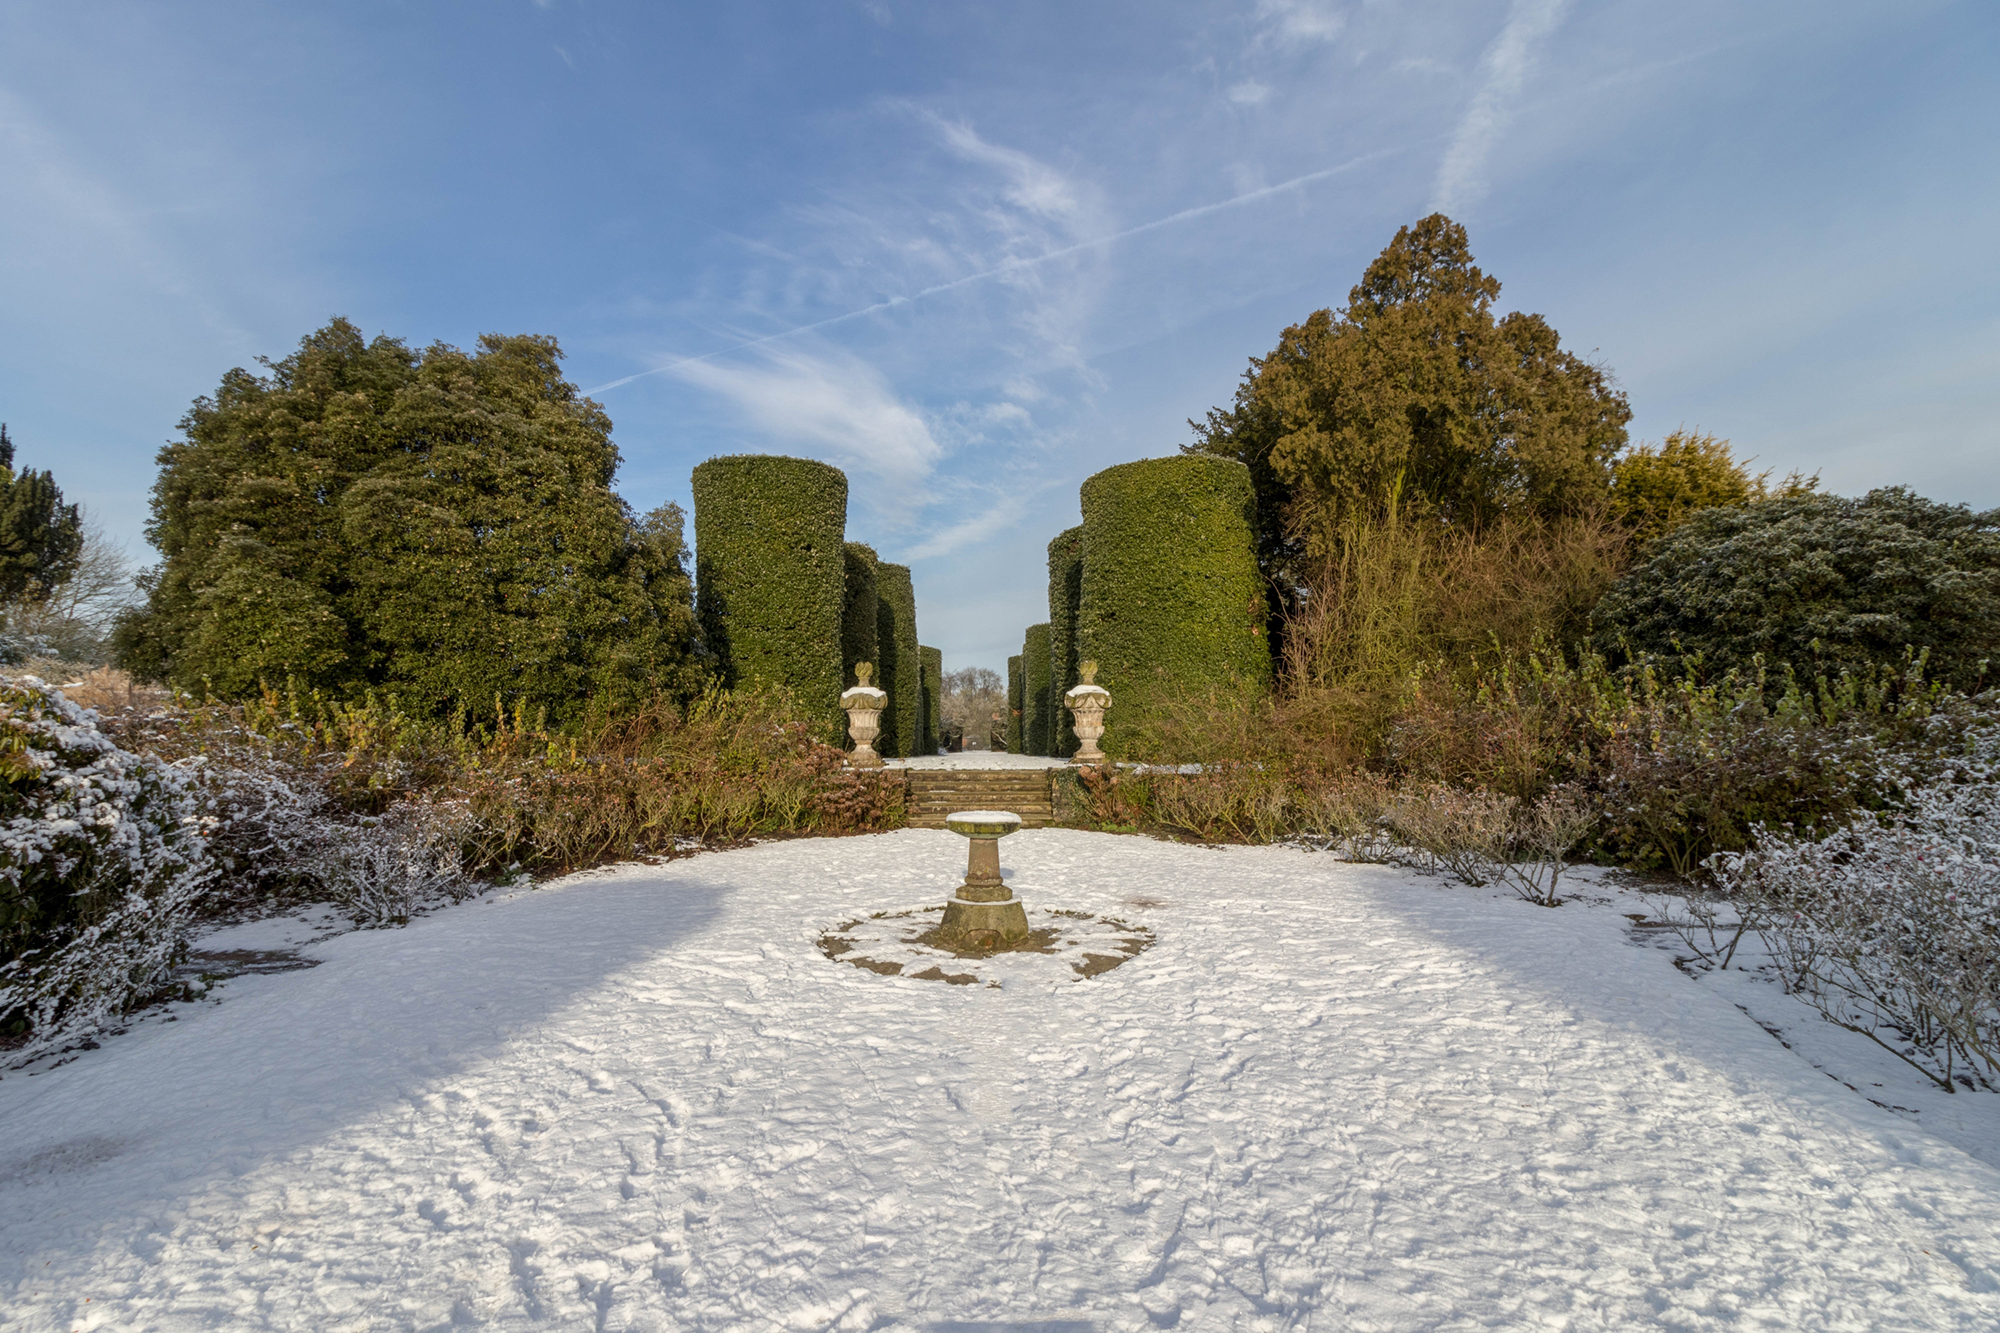 Snow-covered garden with stone fountain in the centre of the lawn